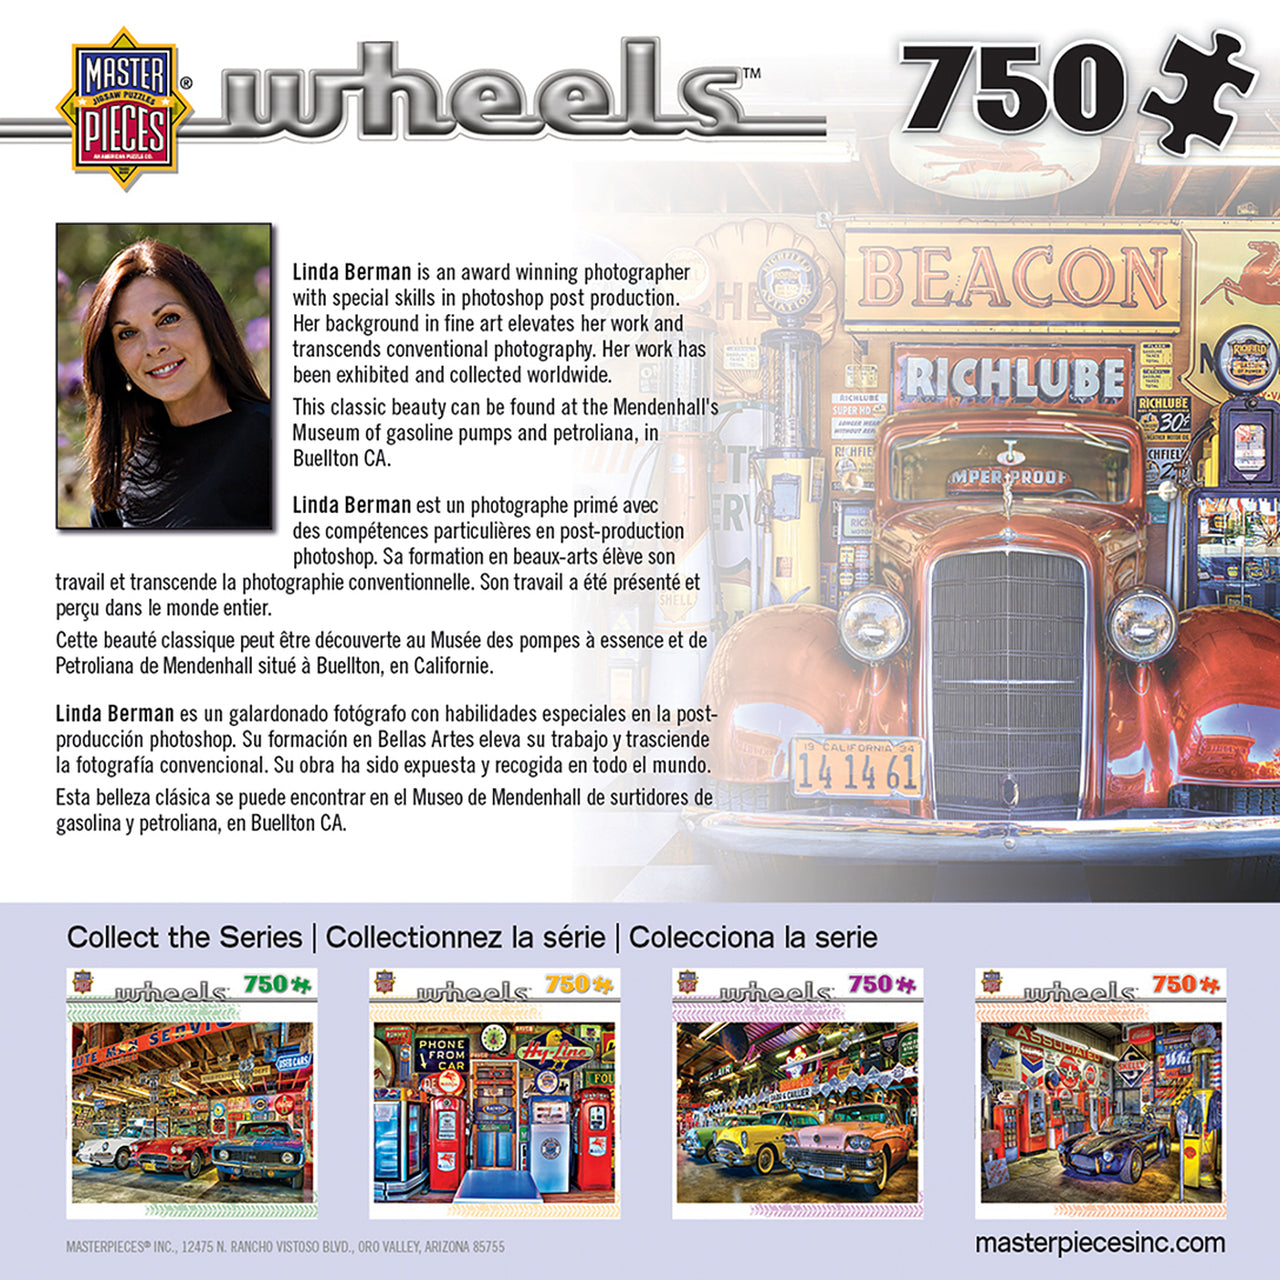 Wheels - At Your Service 750 Piece Jigsaw Puzzle by Masterpieces